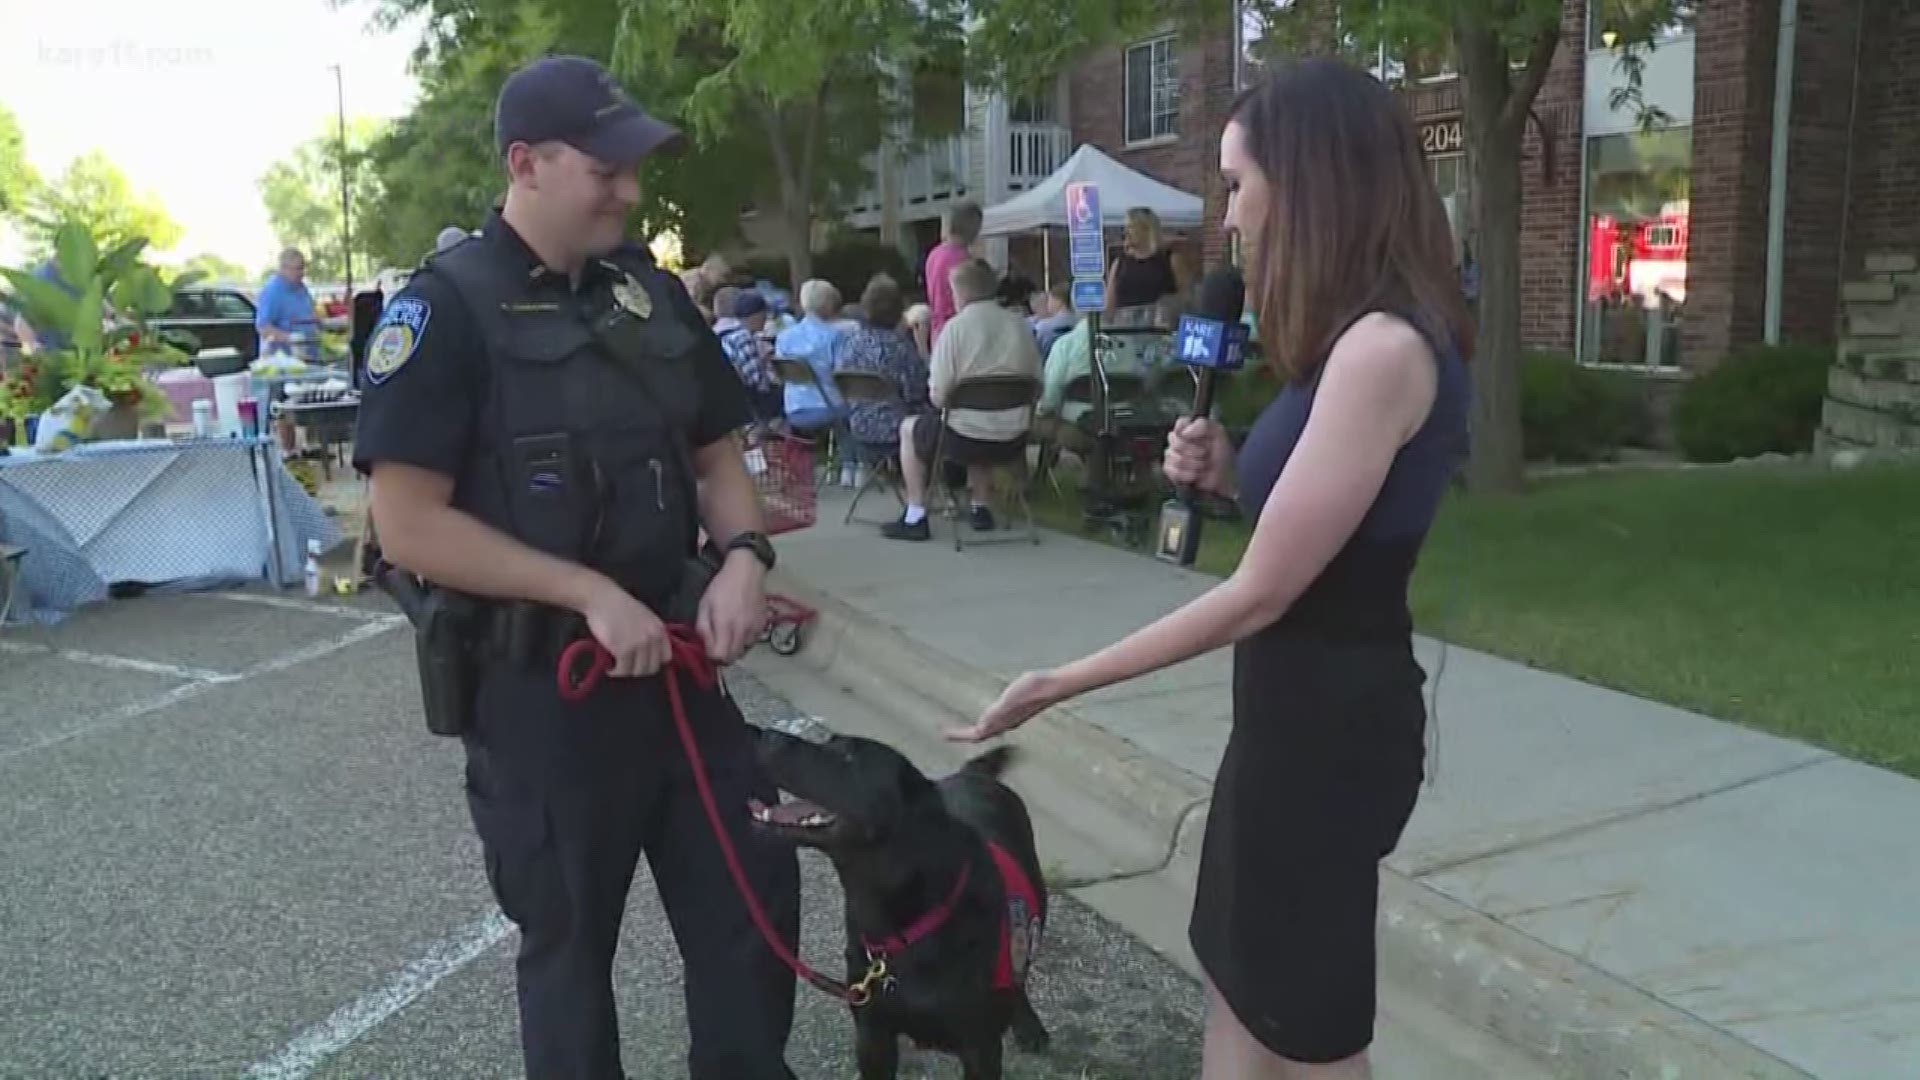 Millions of people are coming together not only to get to know each other, but to make connections with police officers for national night out.